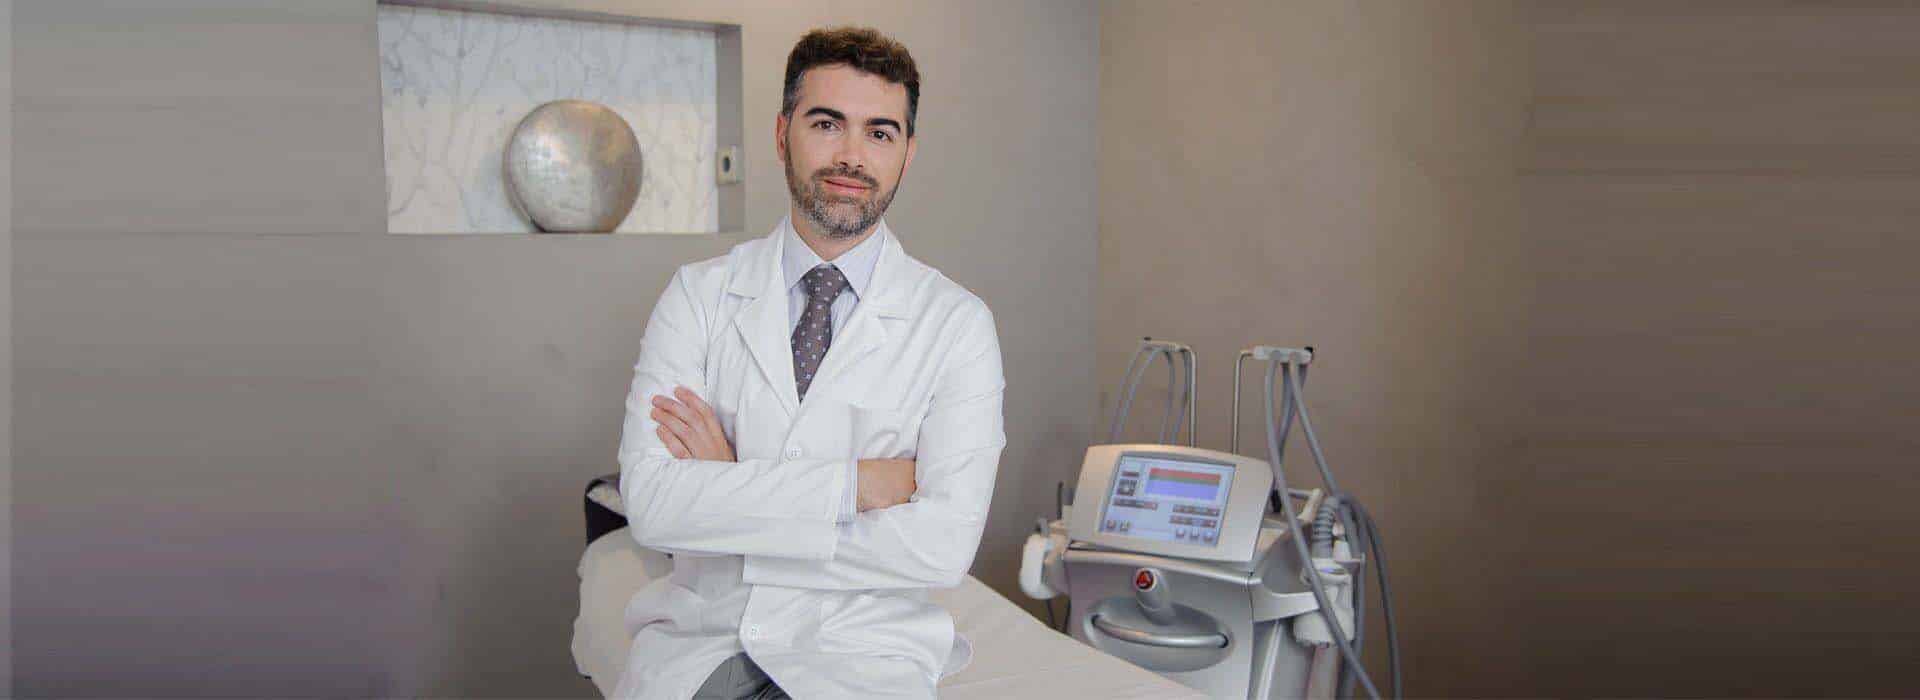 doctor galindo ceo beauty one center